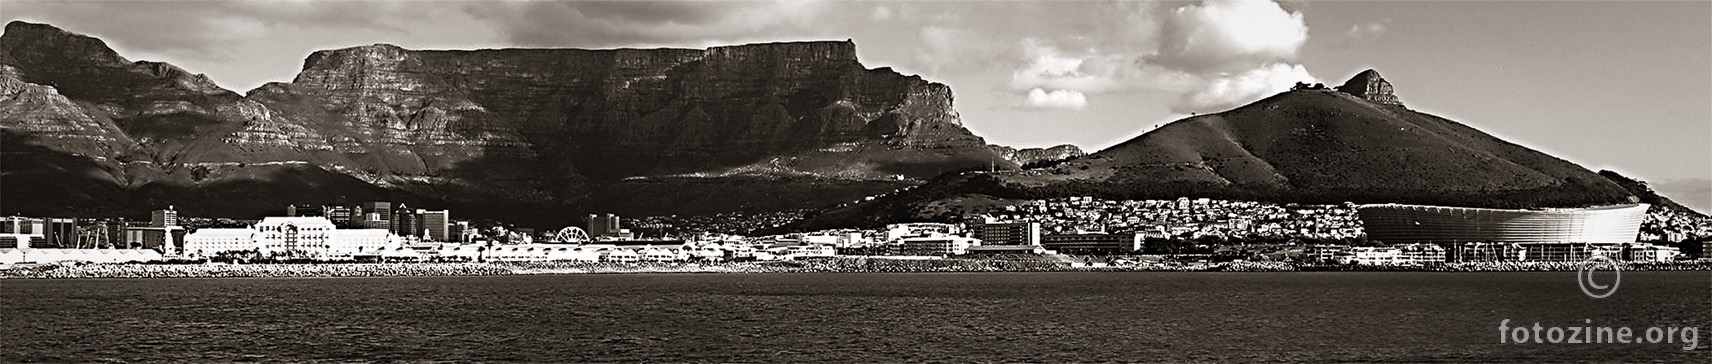 Cape Town Pano BW